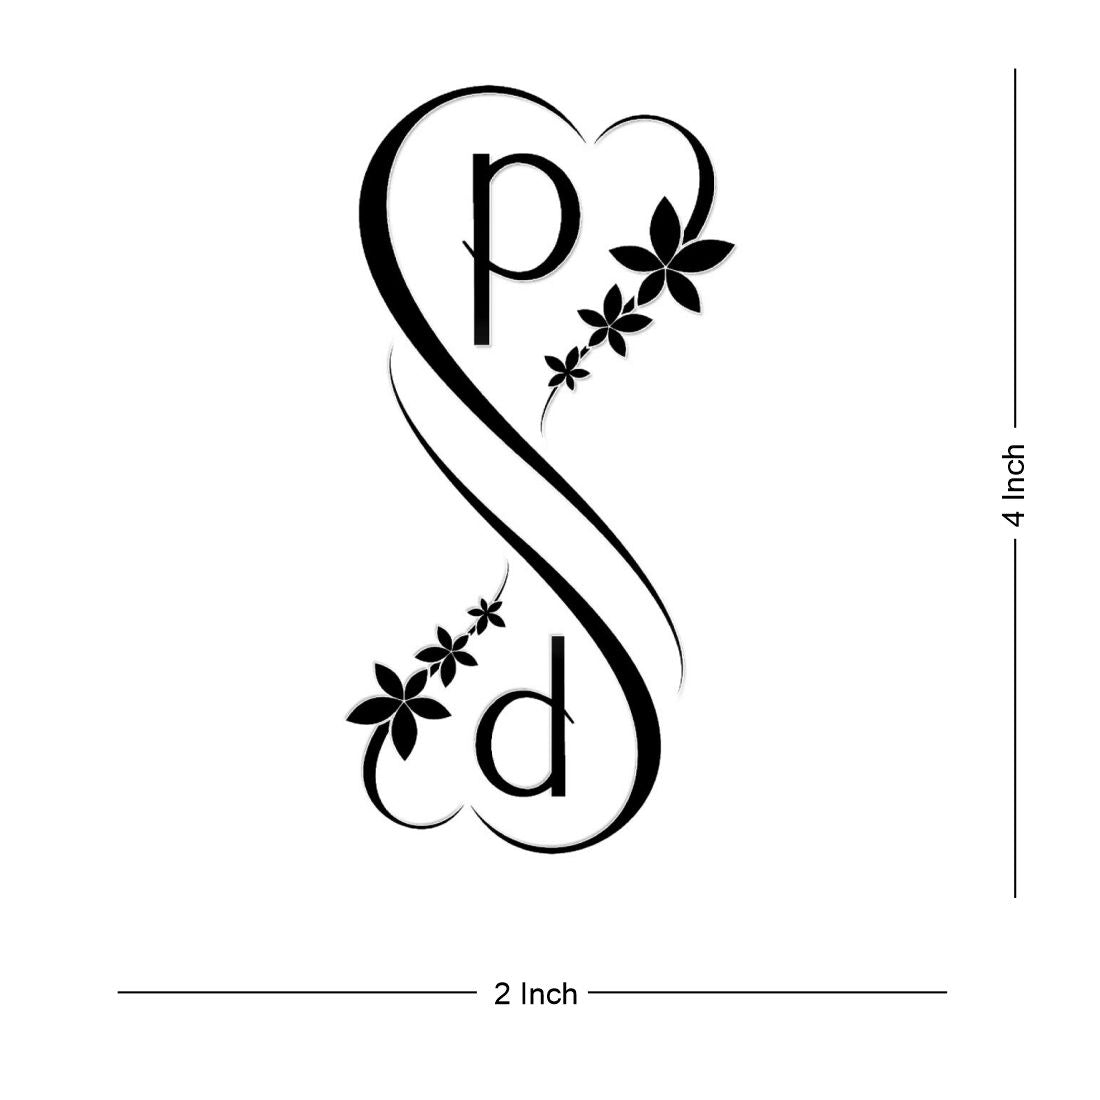 181 Tattooz Studio  Small design of letter p with heartbeat on forearm  which looks feminine Book your appointment with us through our website or  visit our studio 181tattoozstudio www181tattoozcom Or contact